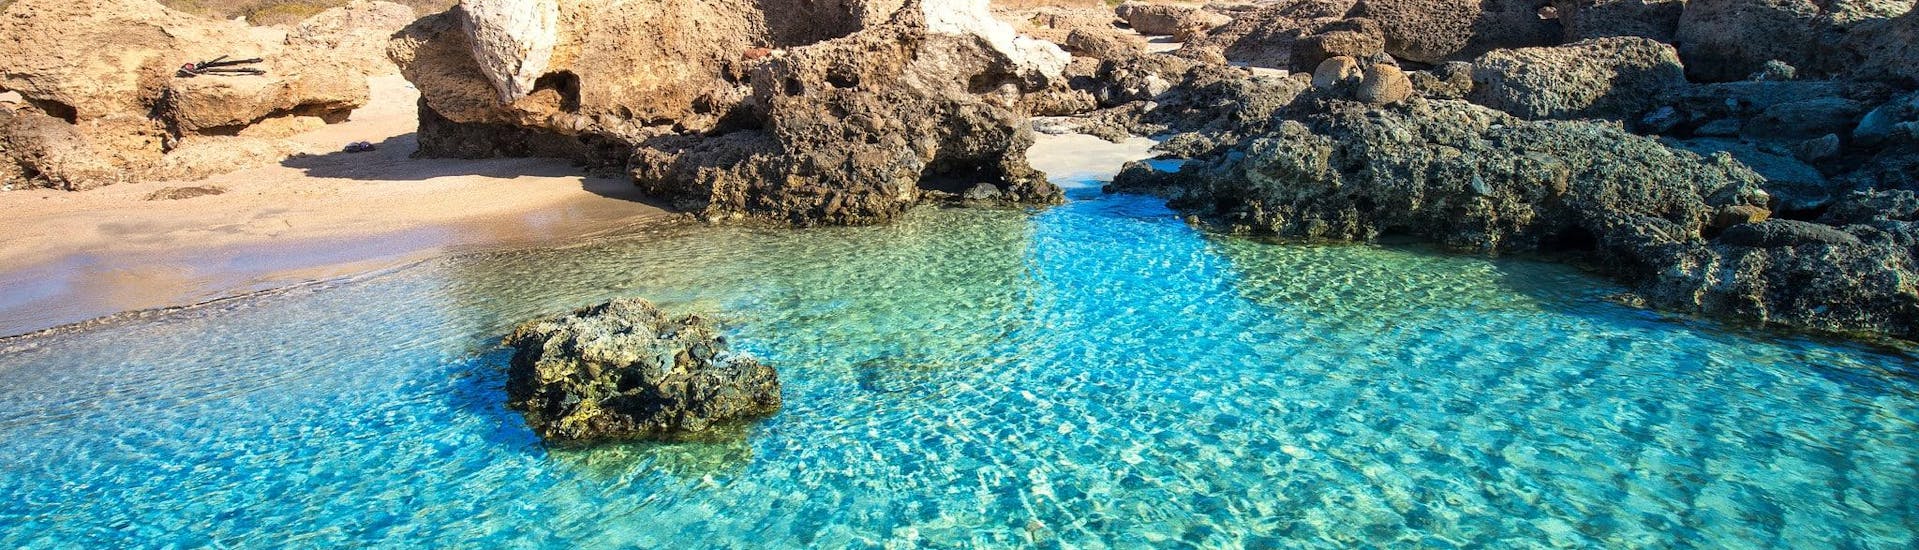 One of the beautiful beaches that can be visited during a boat trip from Makris Gialos.